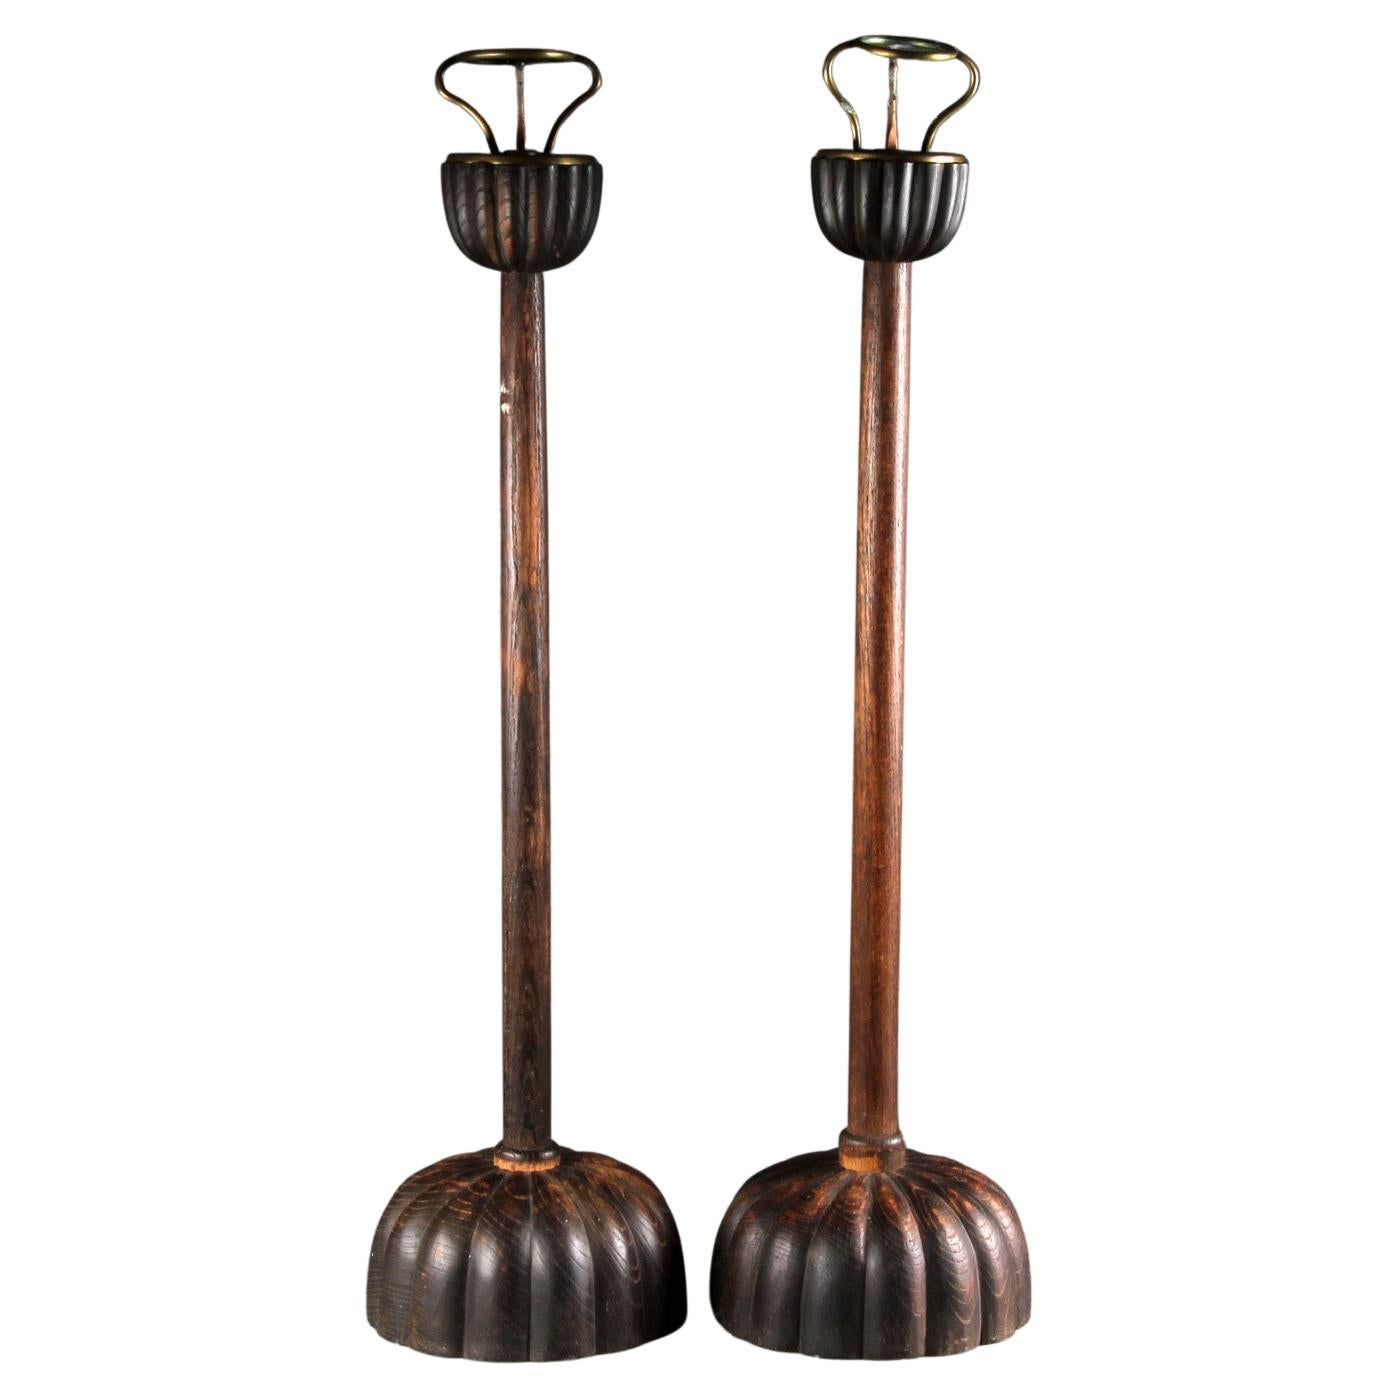 Shokudai Candle Holders of Wood from Japan, Meiji 1868-1912